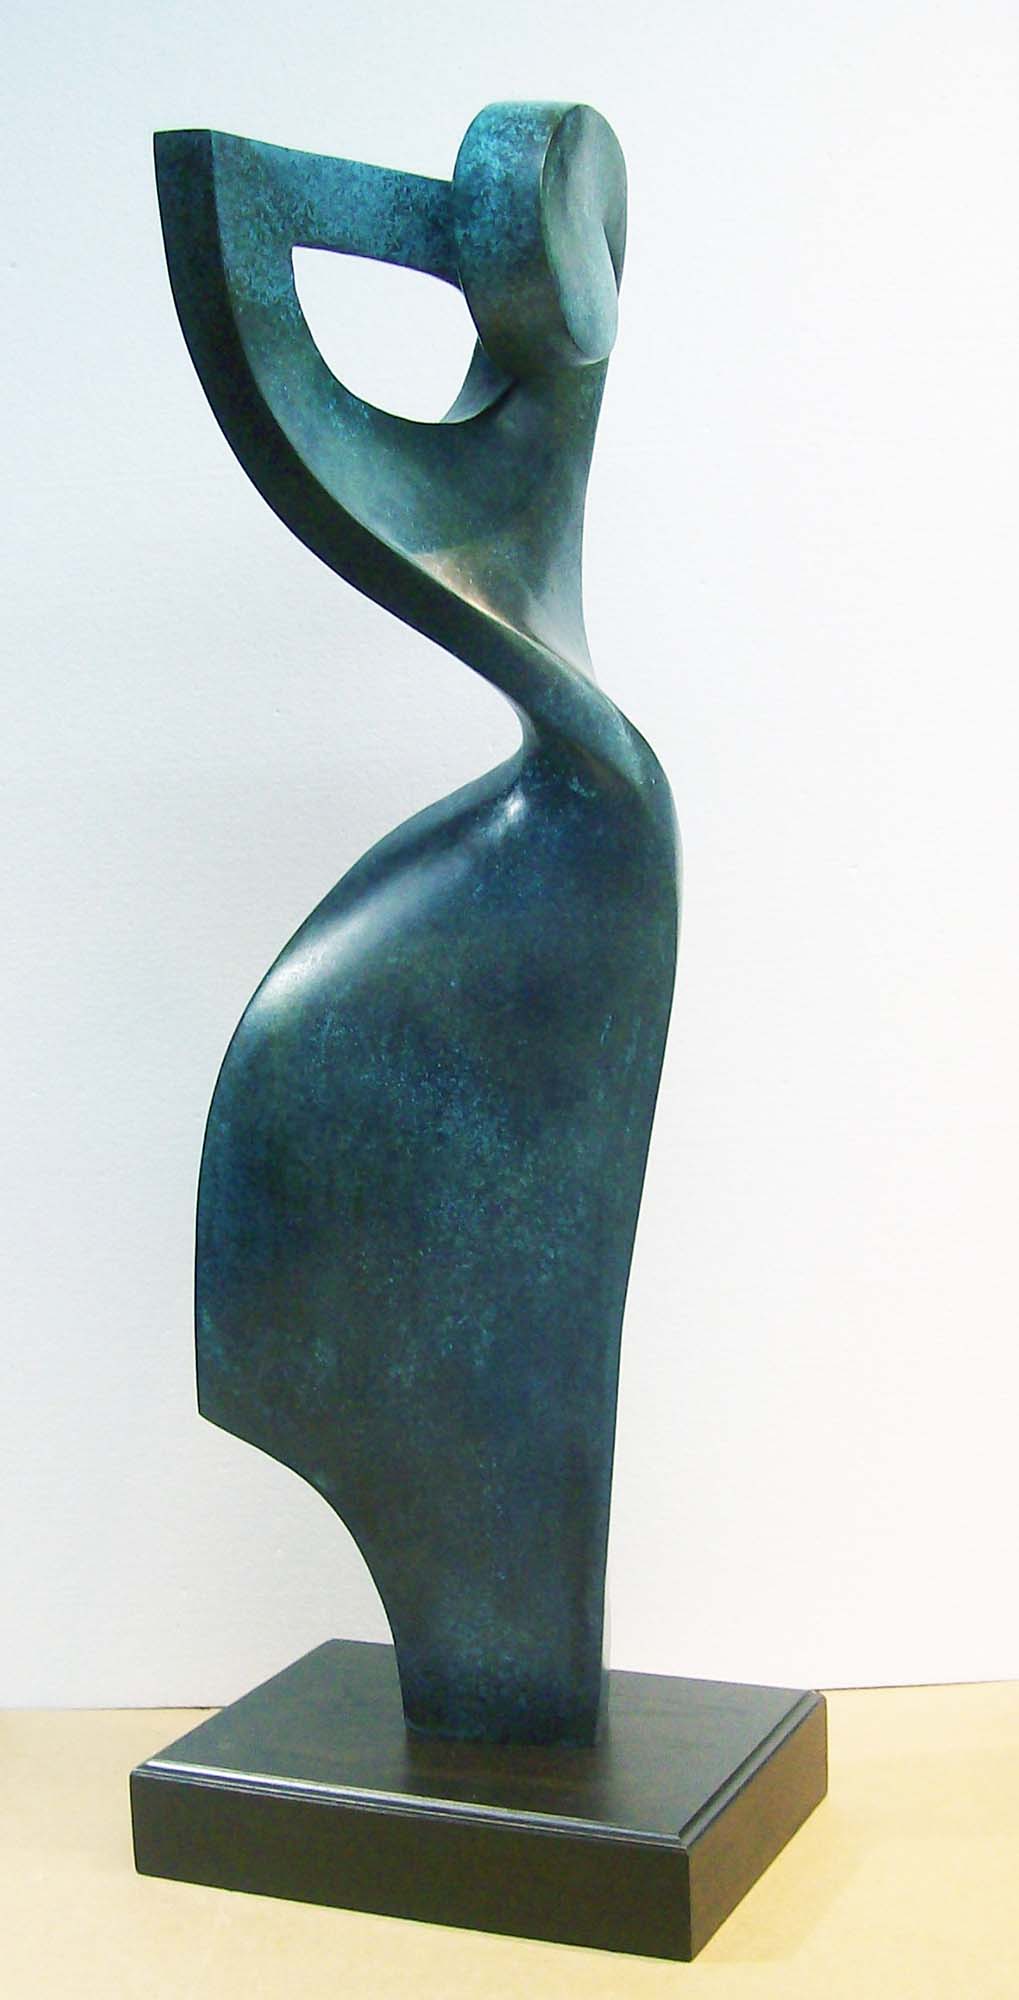 Contemporary Sculpture. Title: In Love with the Wind, Bronze, 30½ x 9 x 7 in by Canadian sculptor Serge Mozhnevsky.